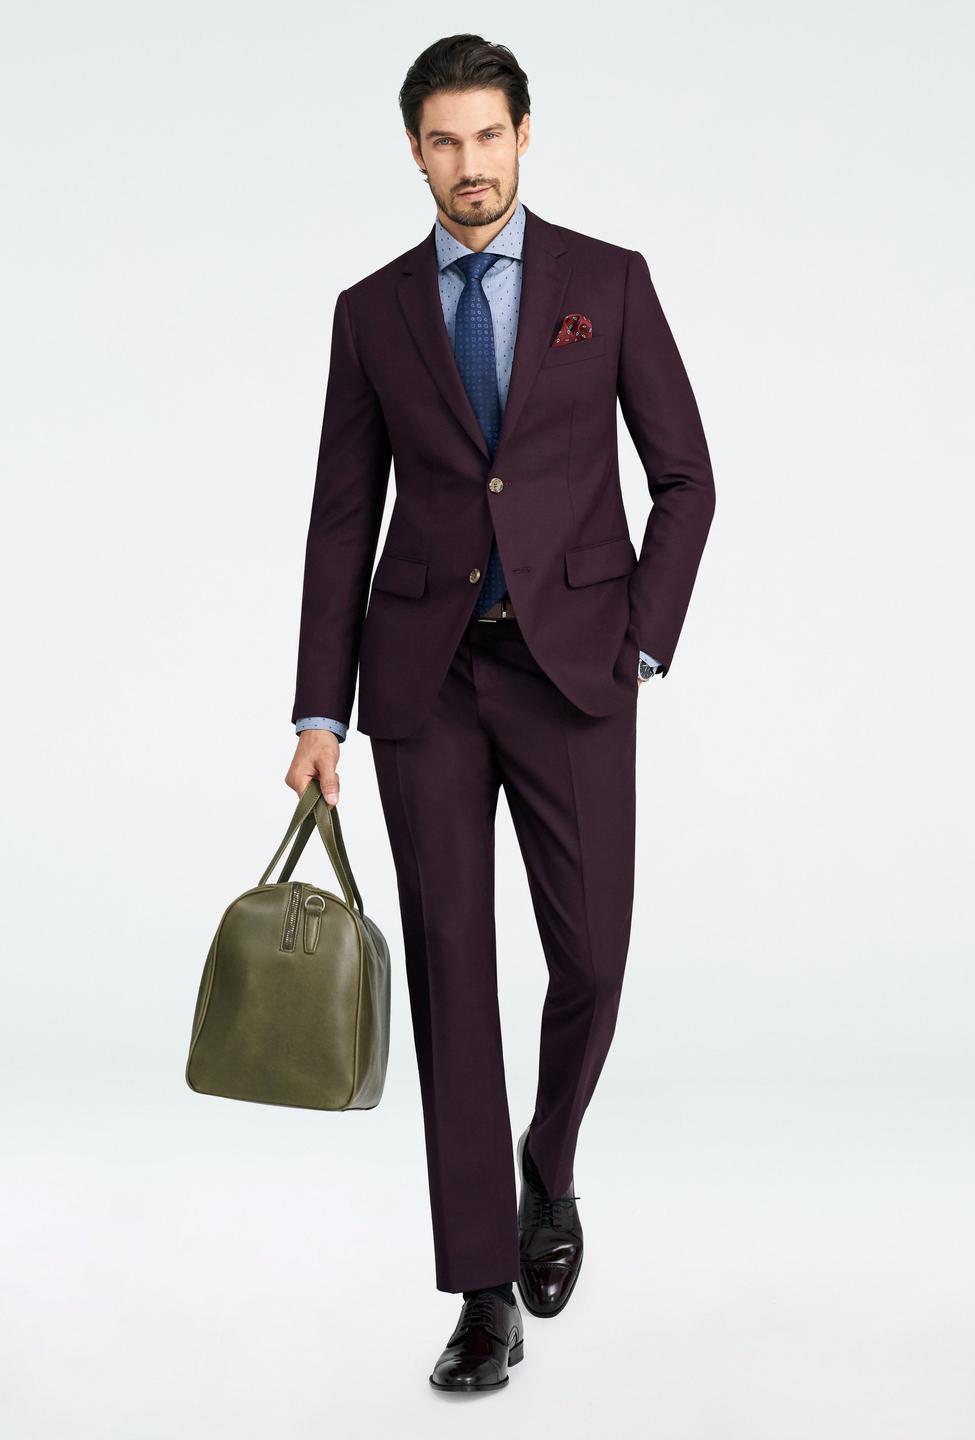 Burgundy suit - Hayward Solid Design from Luxury Indochino Collection